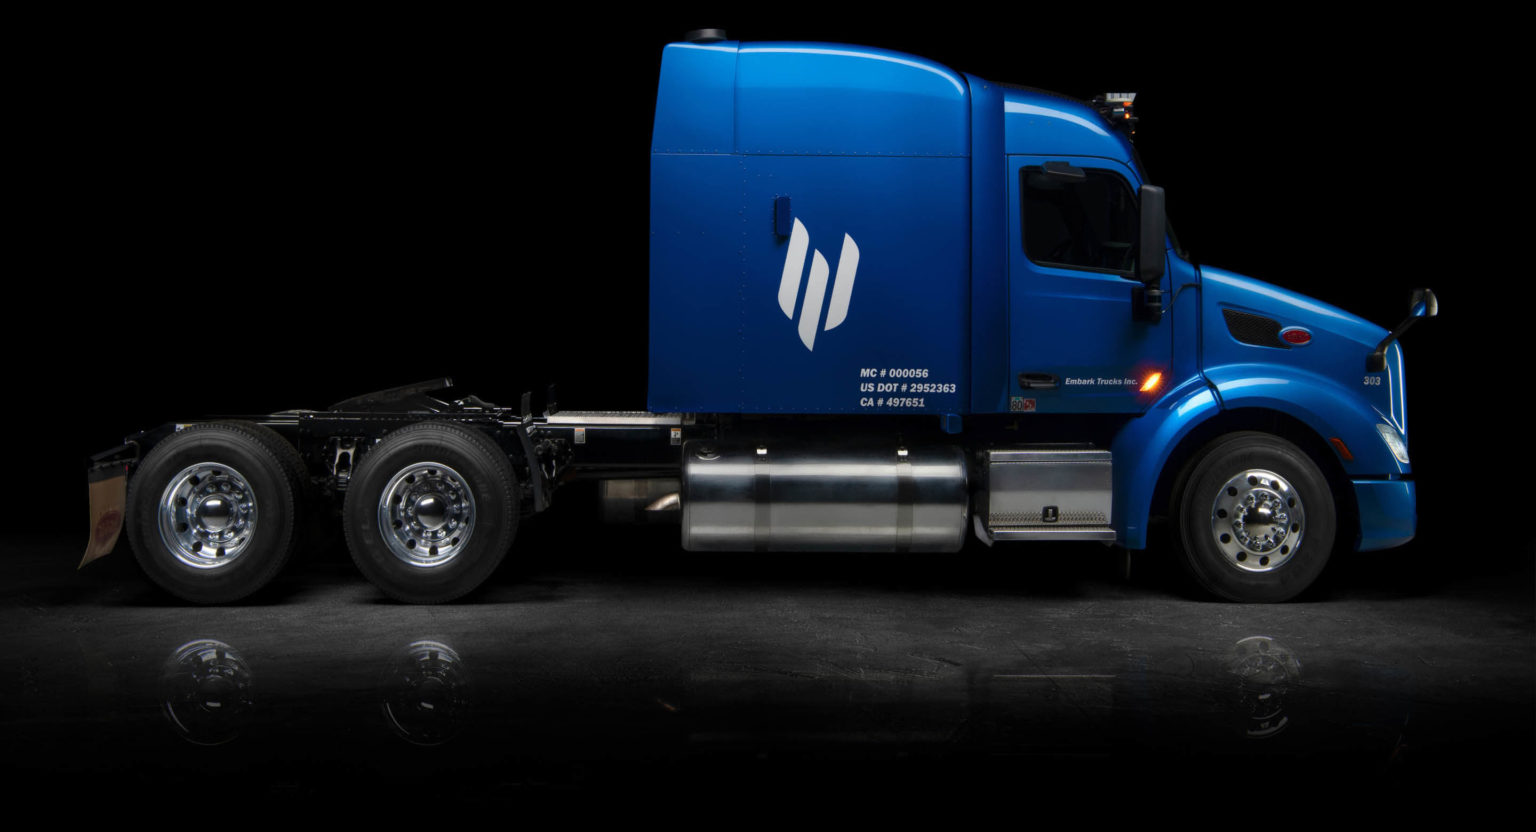 Applied Intuition to acquire self-driving truck software company Embark for $71M